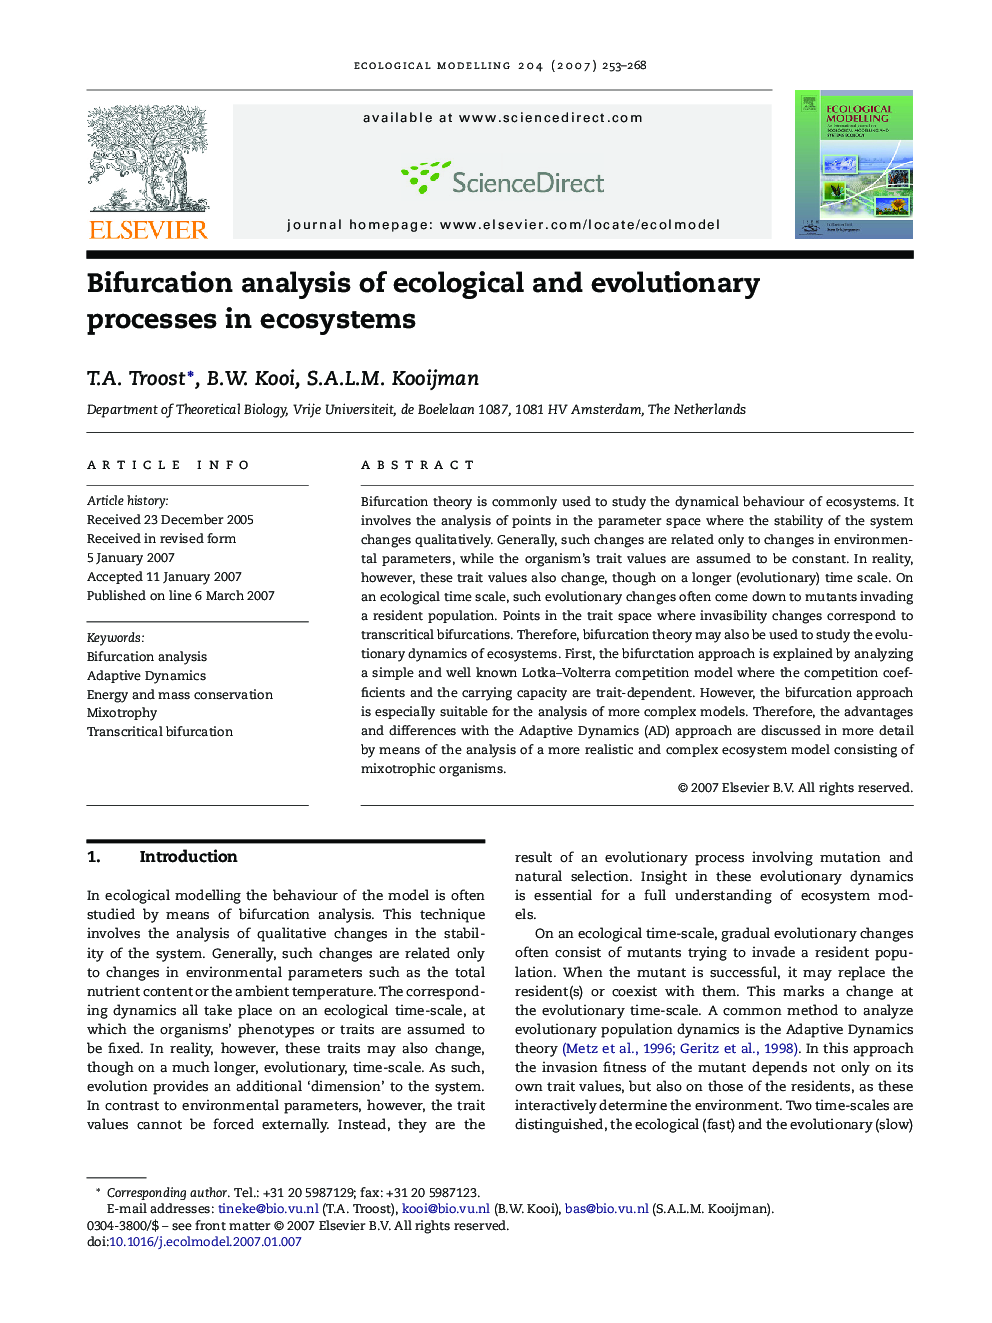 Bifurcation analysis of ecological and evolutionary processes in ecosystems